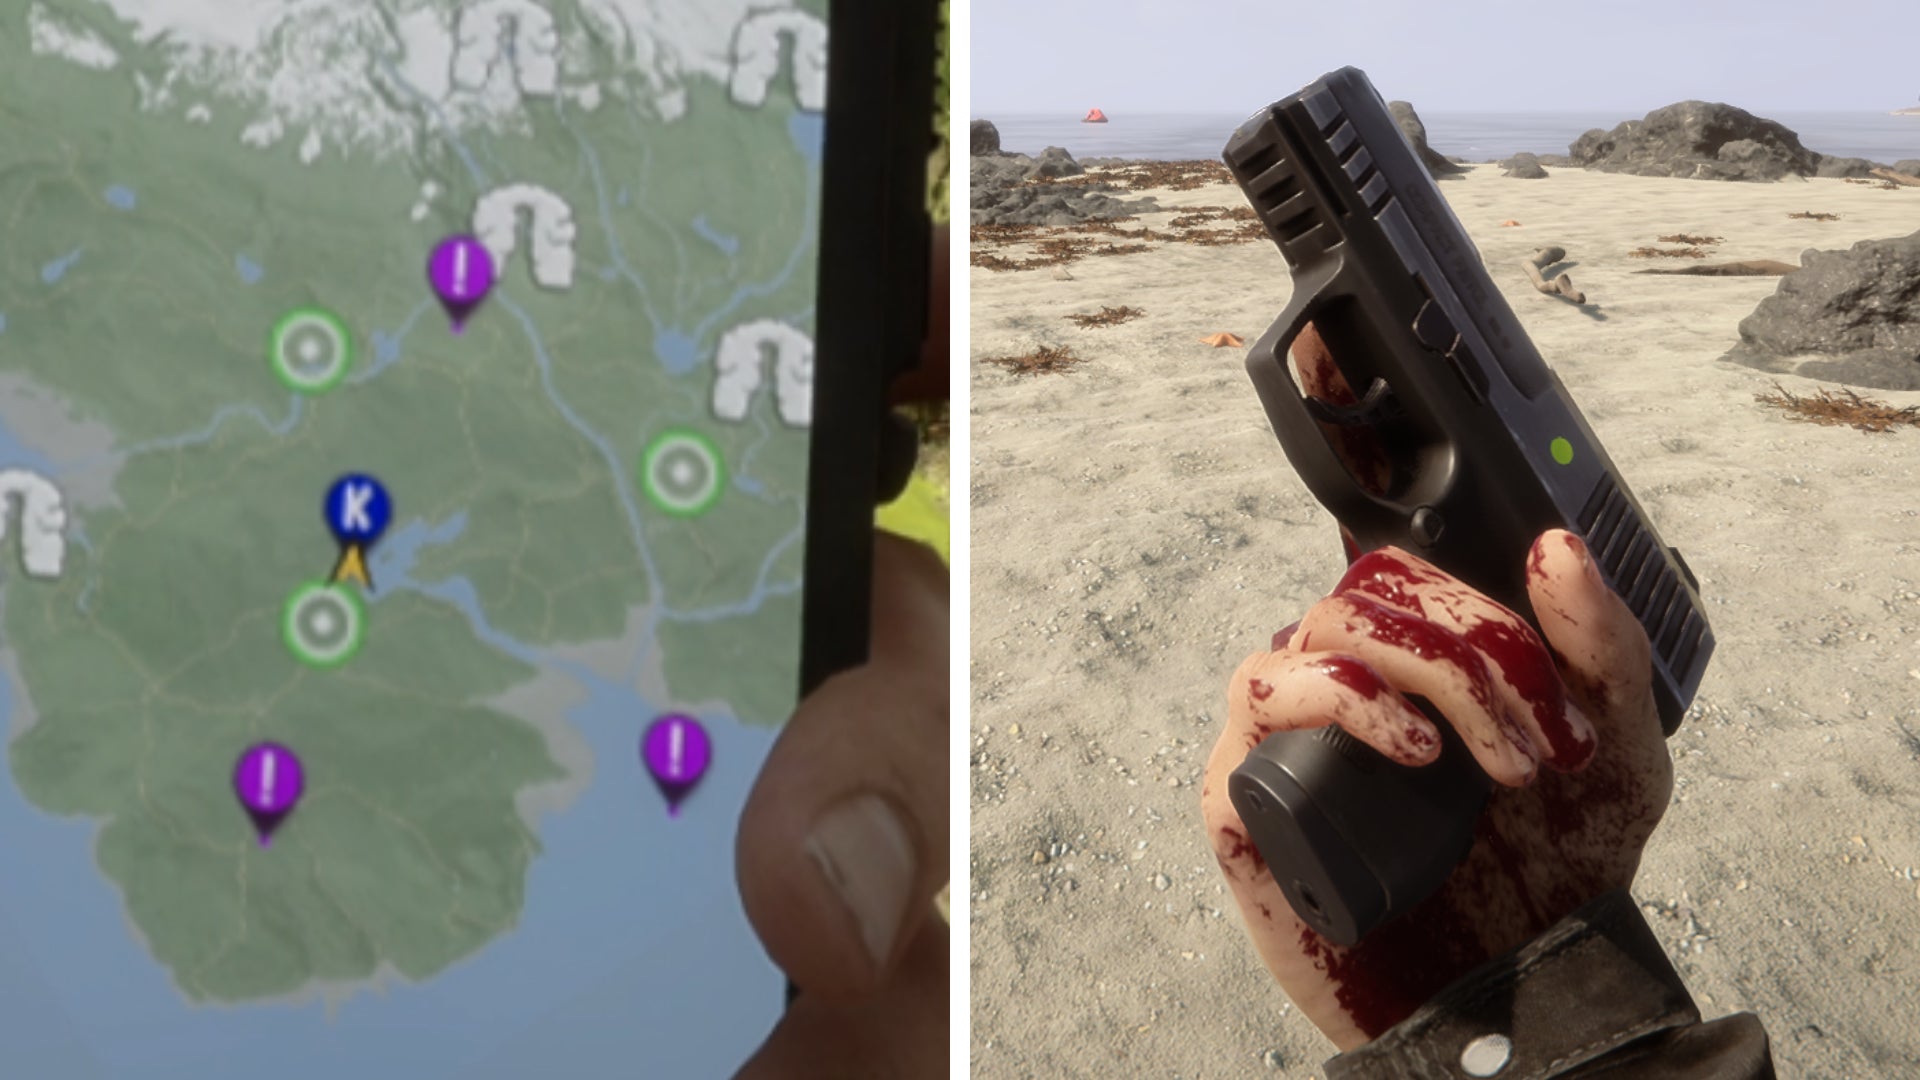 Left: a screenshot of the GPS map in Sons Of The Forest, showing the three purple markers on the map. Right: the player holds a Pistol on a beach.